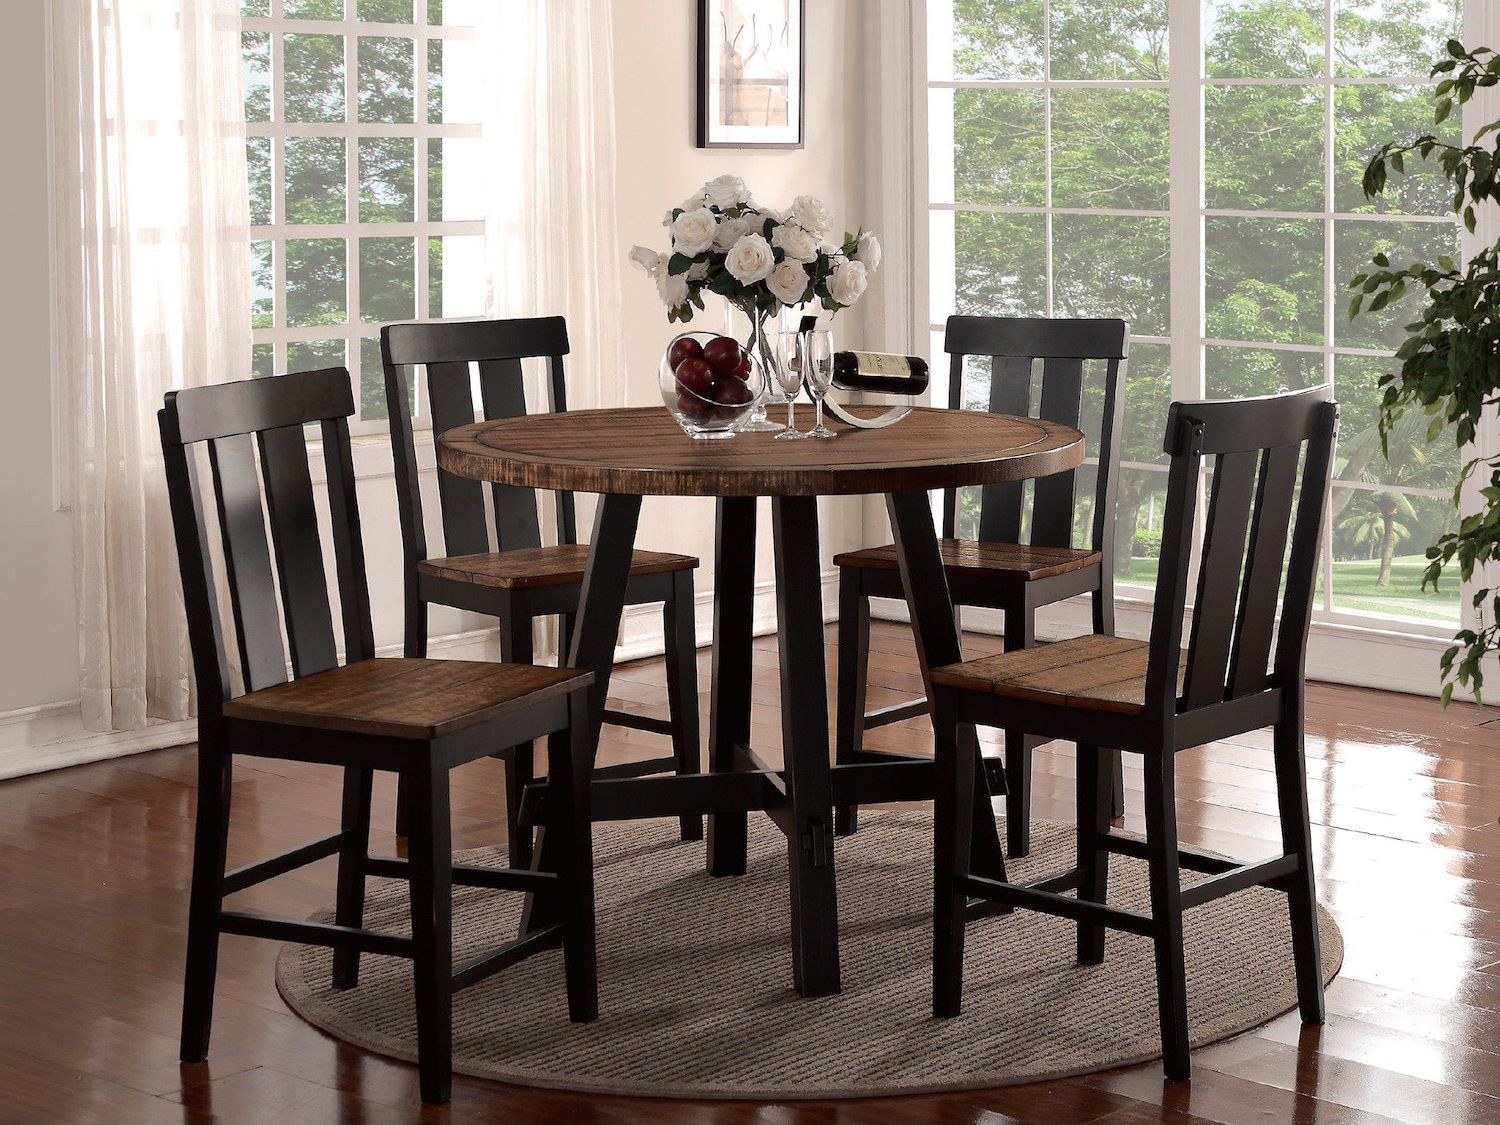 Goodman 5 Piece Counter Height Dining Set With Trendy Goodman 5 Piece Solid Wood Dining Sets (set Of 5) (View 1 of 20)